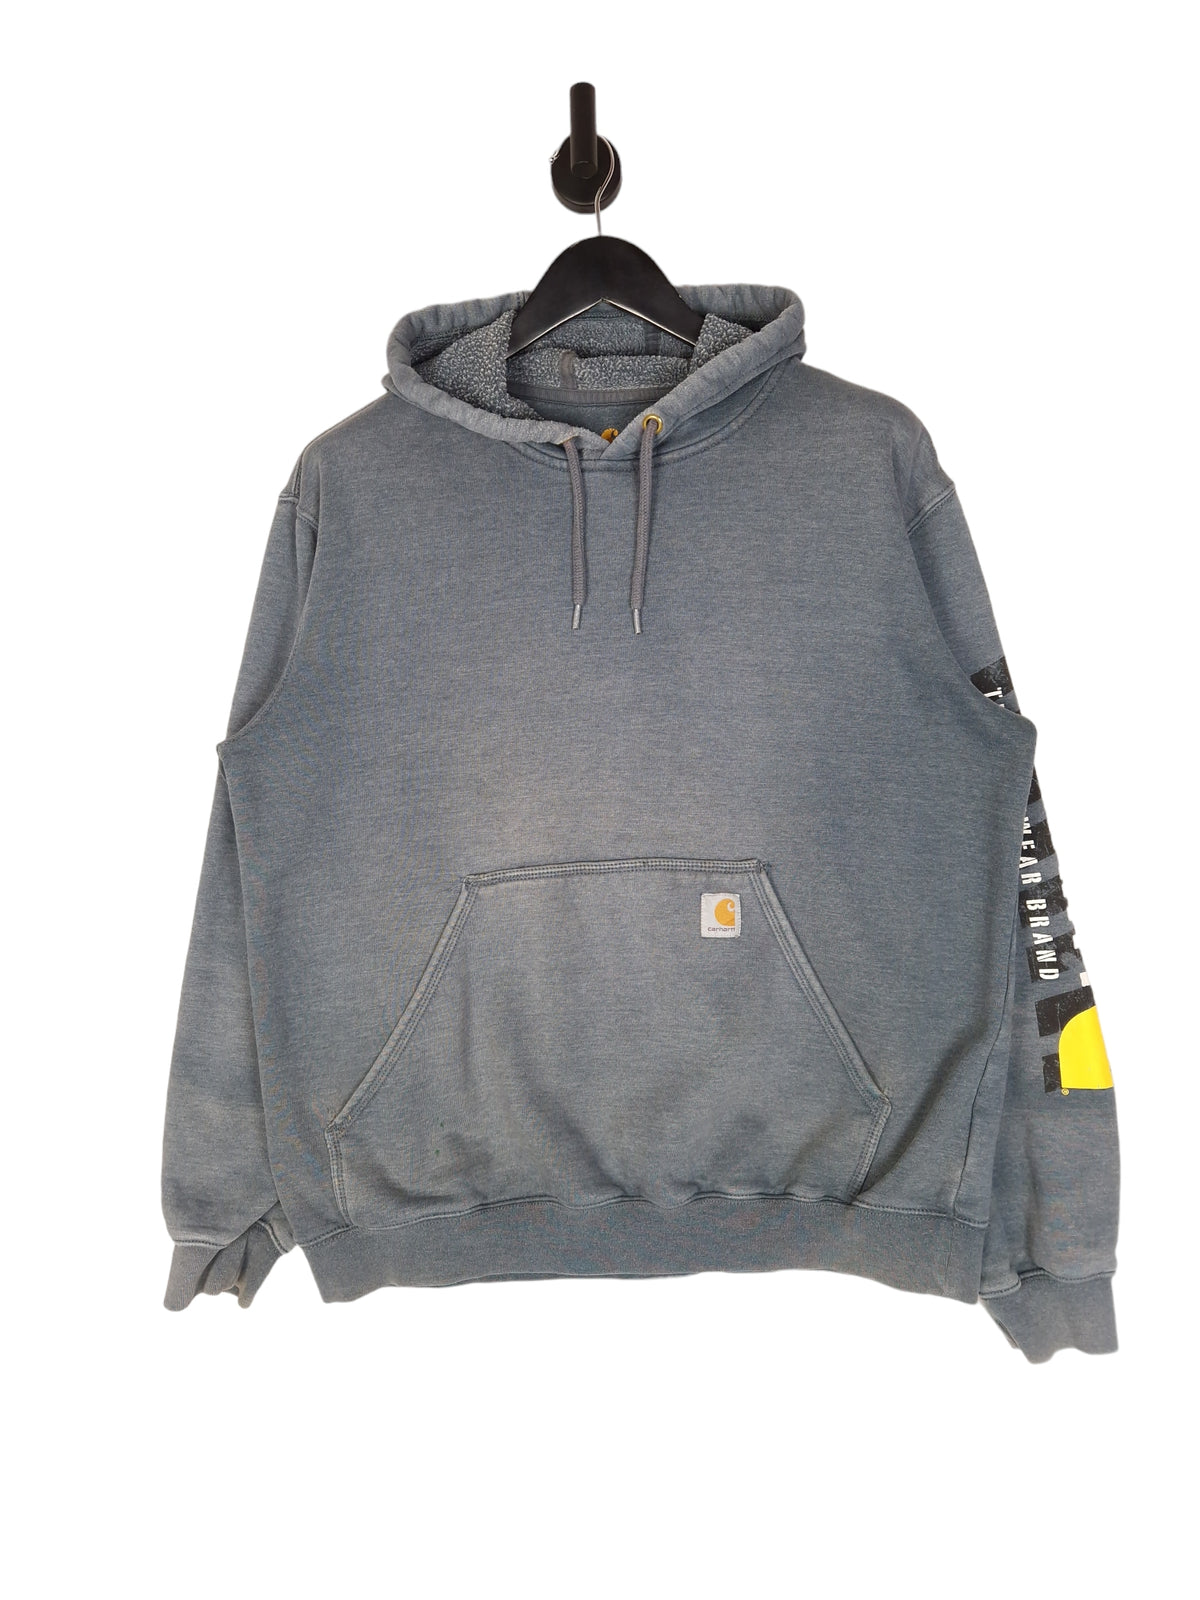 Carhart Relaxed Fit Hoodie - Size Large